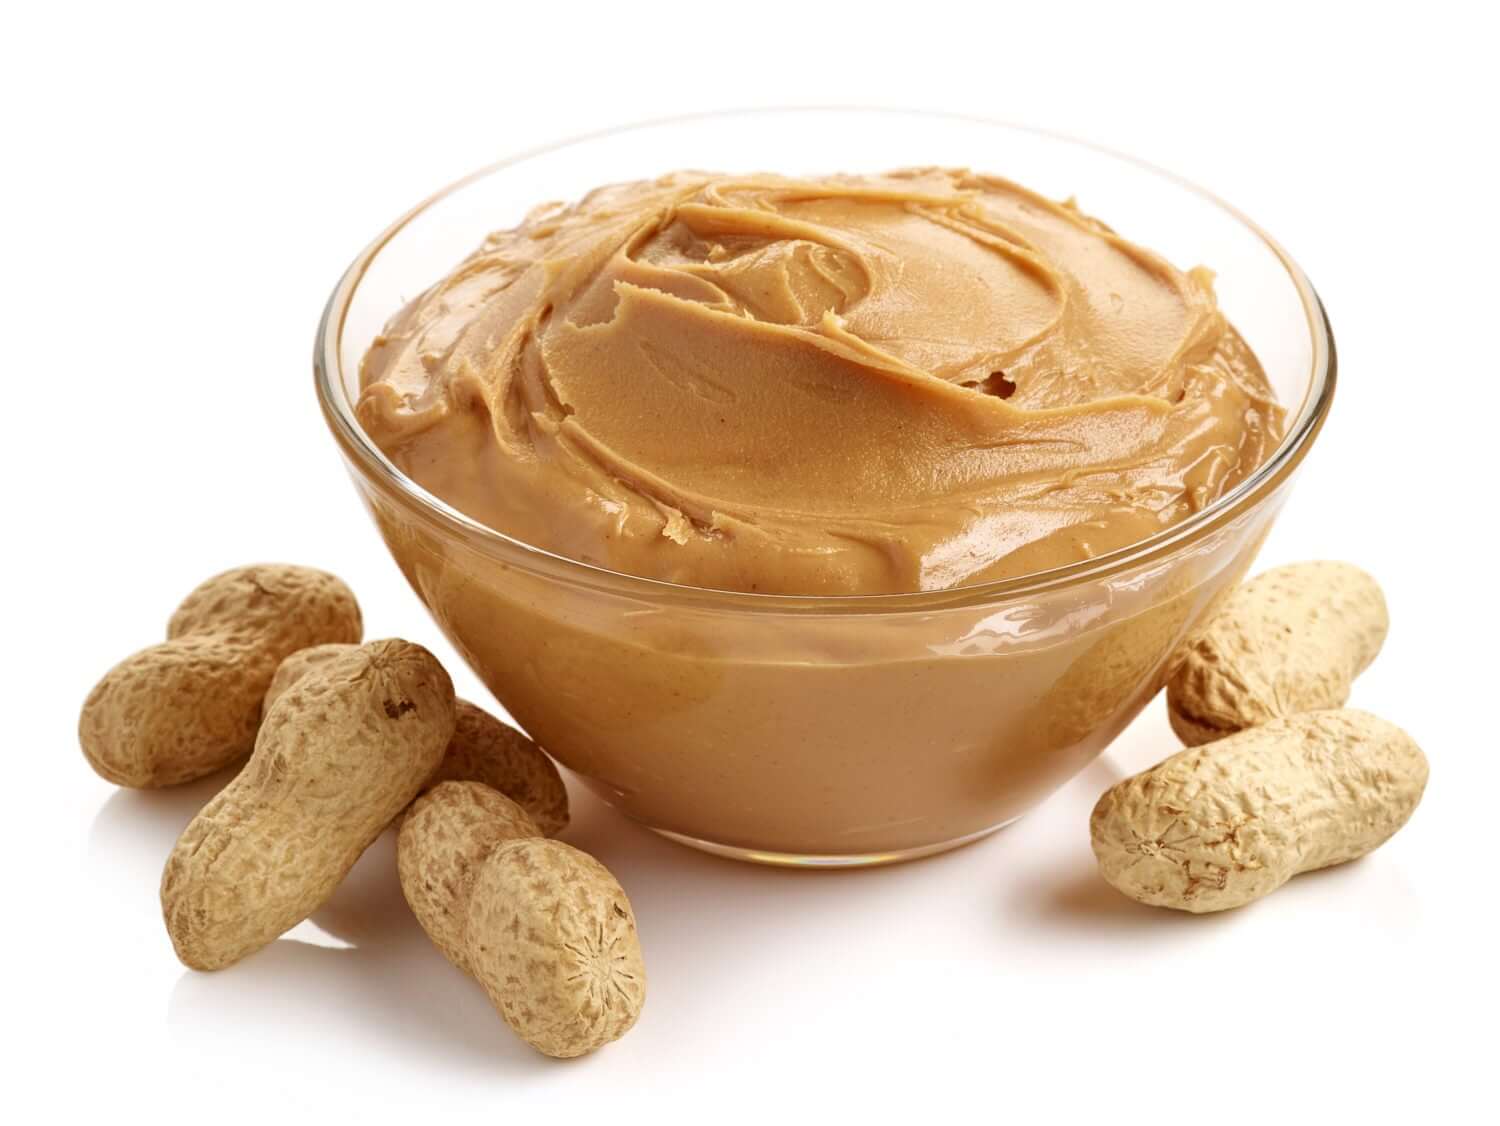 Glass bowl of peanut butter with peanuts